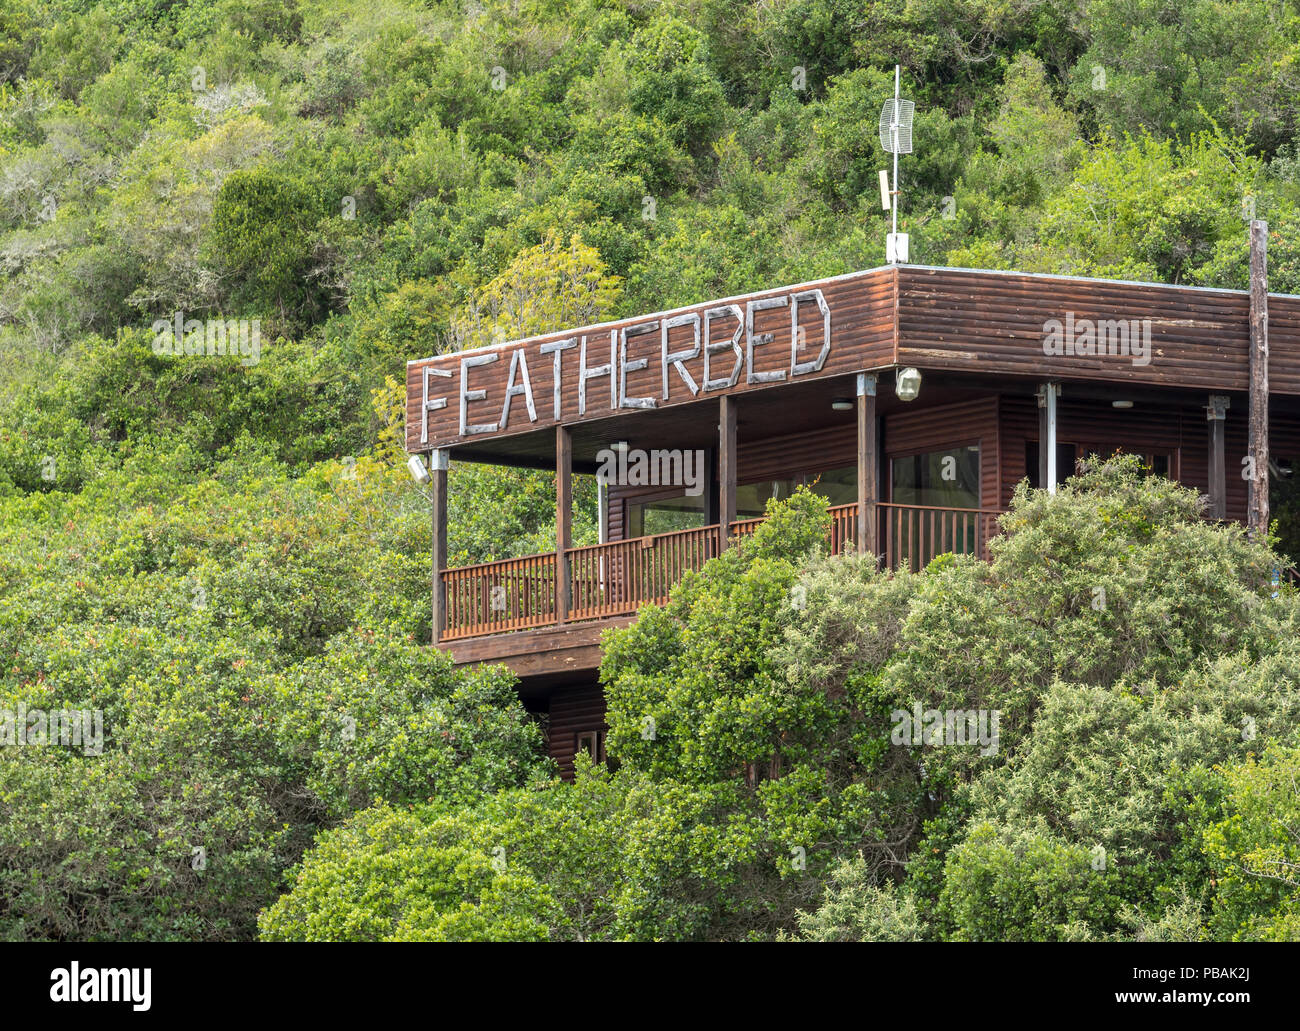 Featherbed Nature reserve in Knysa, South Africa Stock Photo